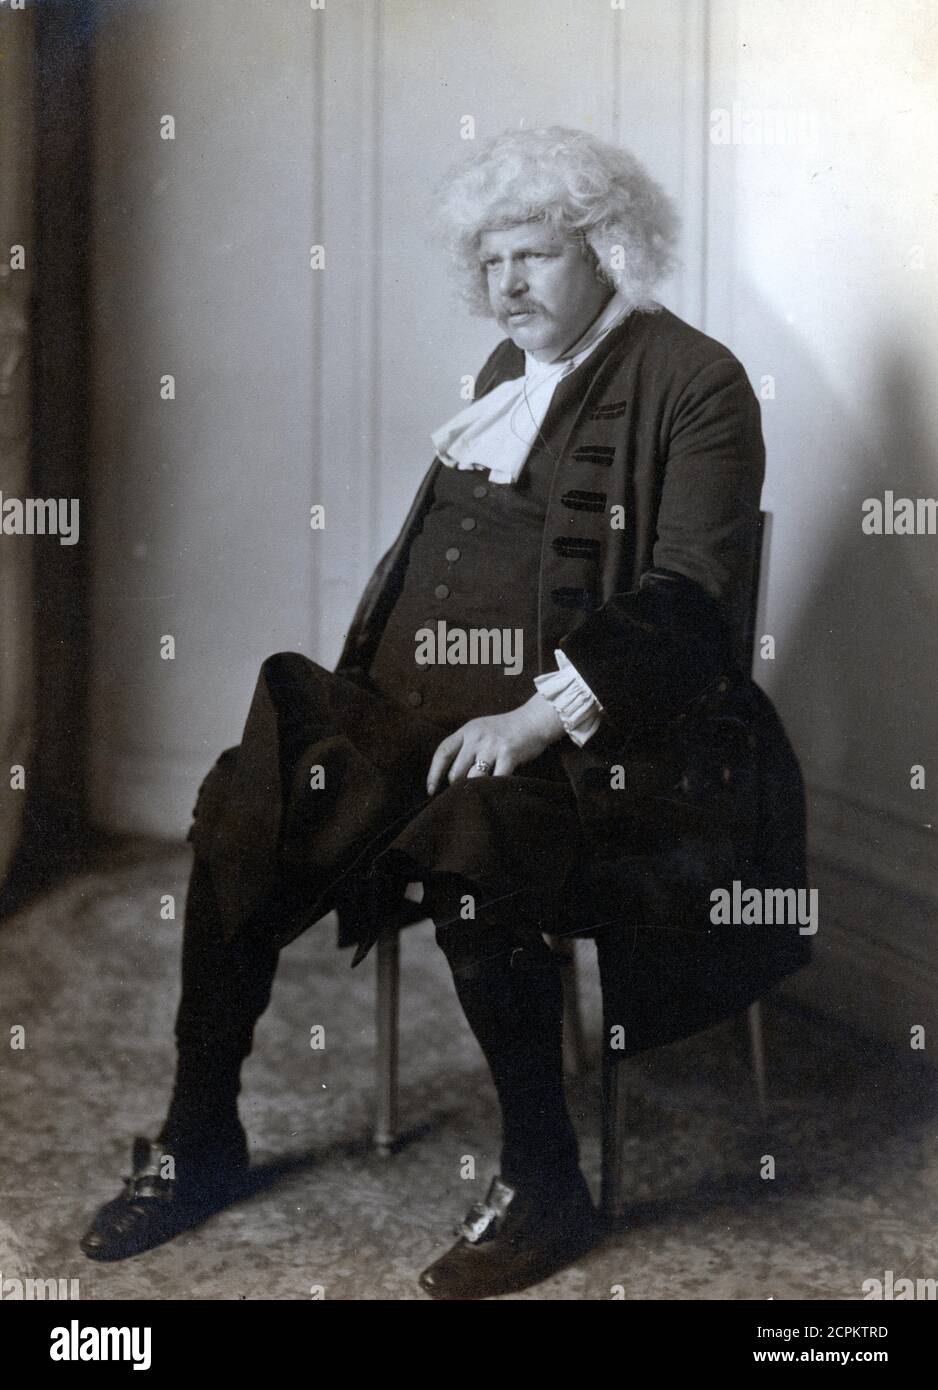 G K Chesterton as Dr Samuel Johnson at the Branksome Tower Hotel, Bournemouth in 1930. Taken from an original photograph by N D Larkin for the London photographers Larkin Brothers Stock Photo